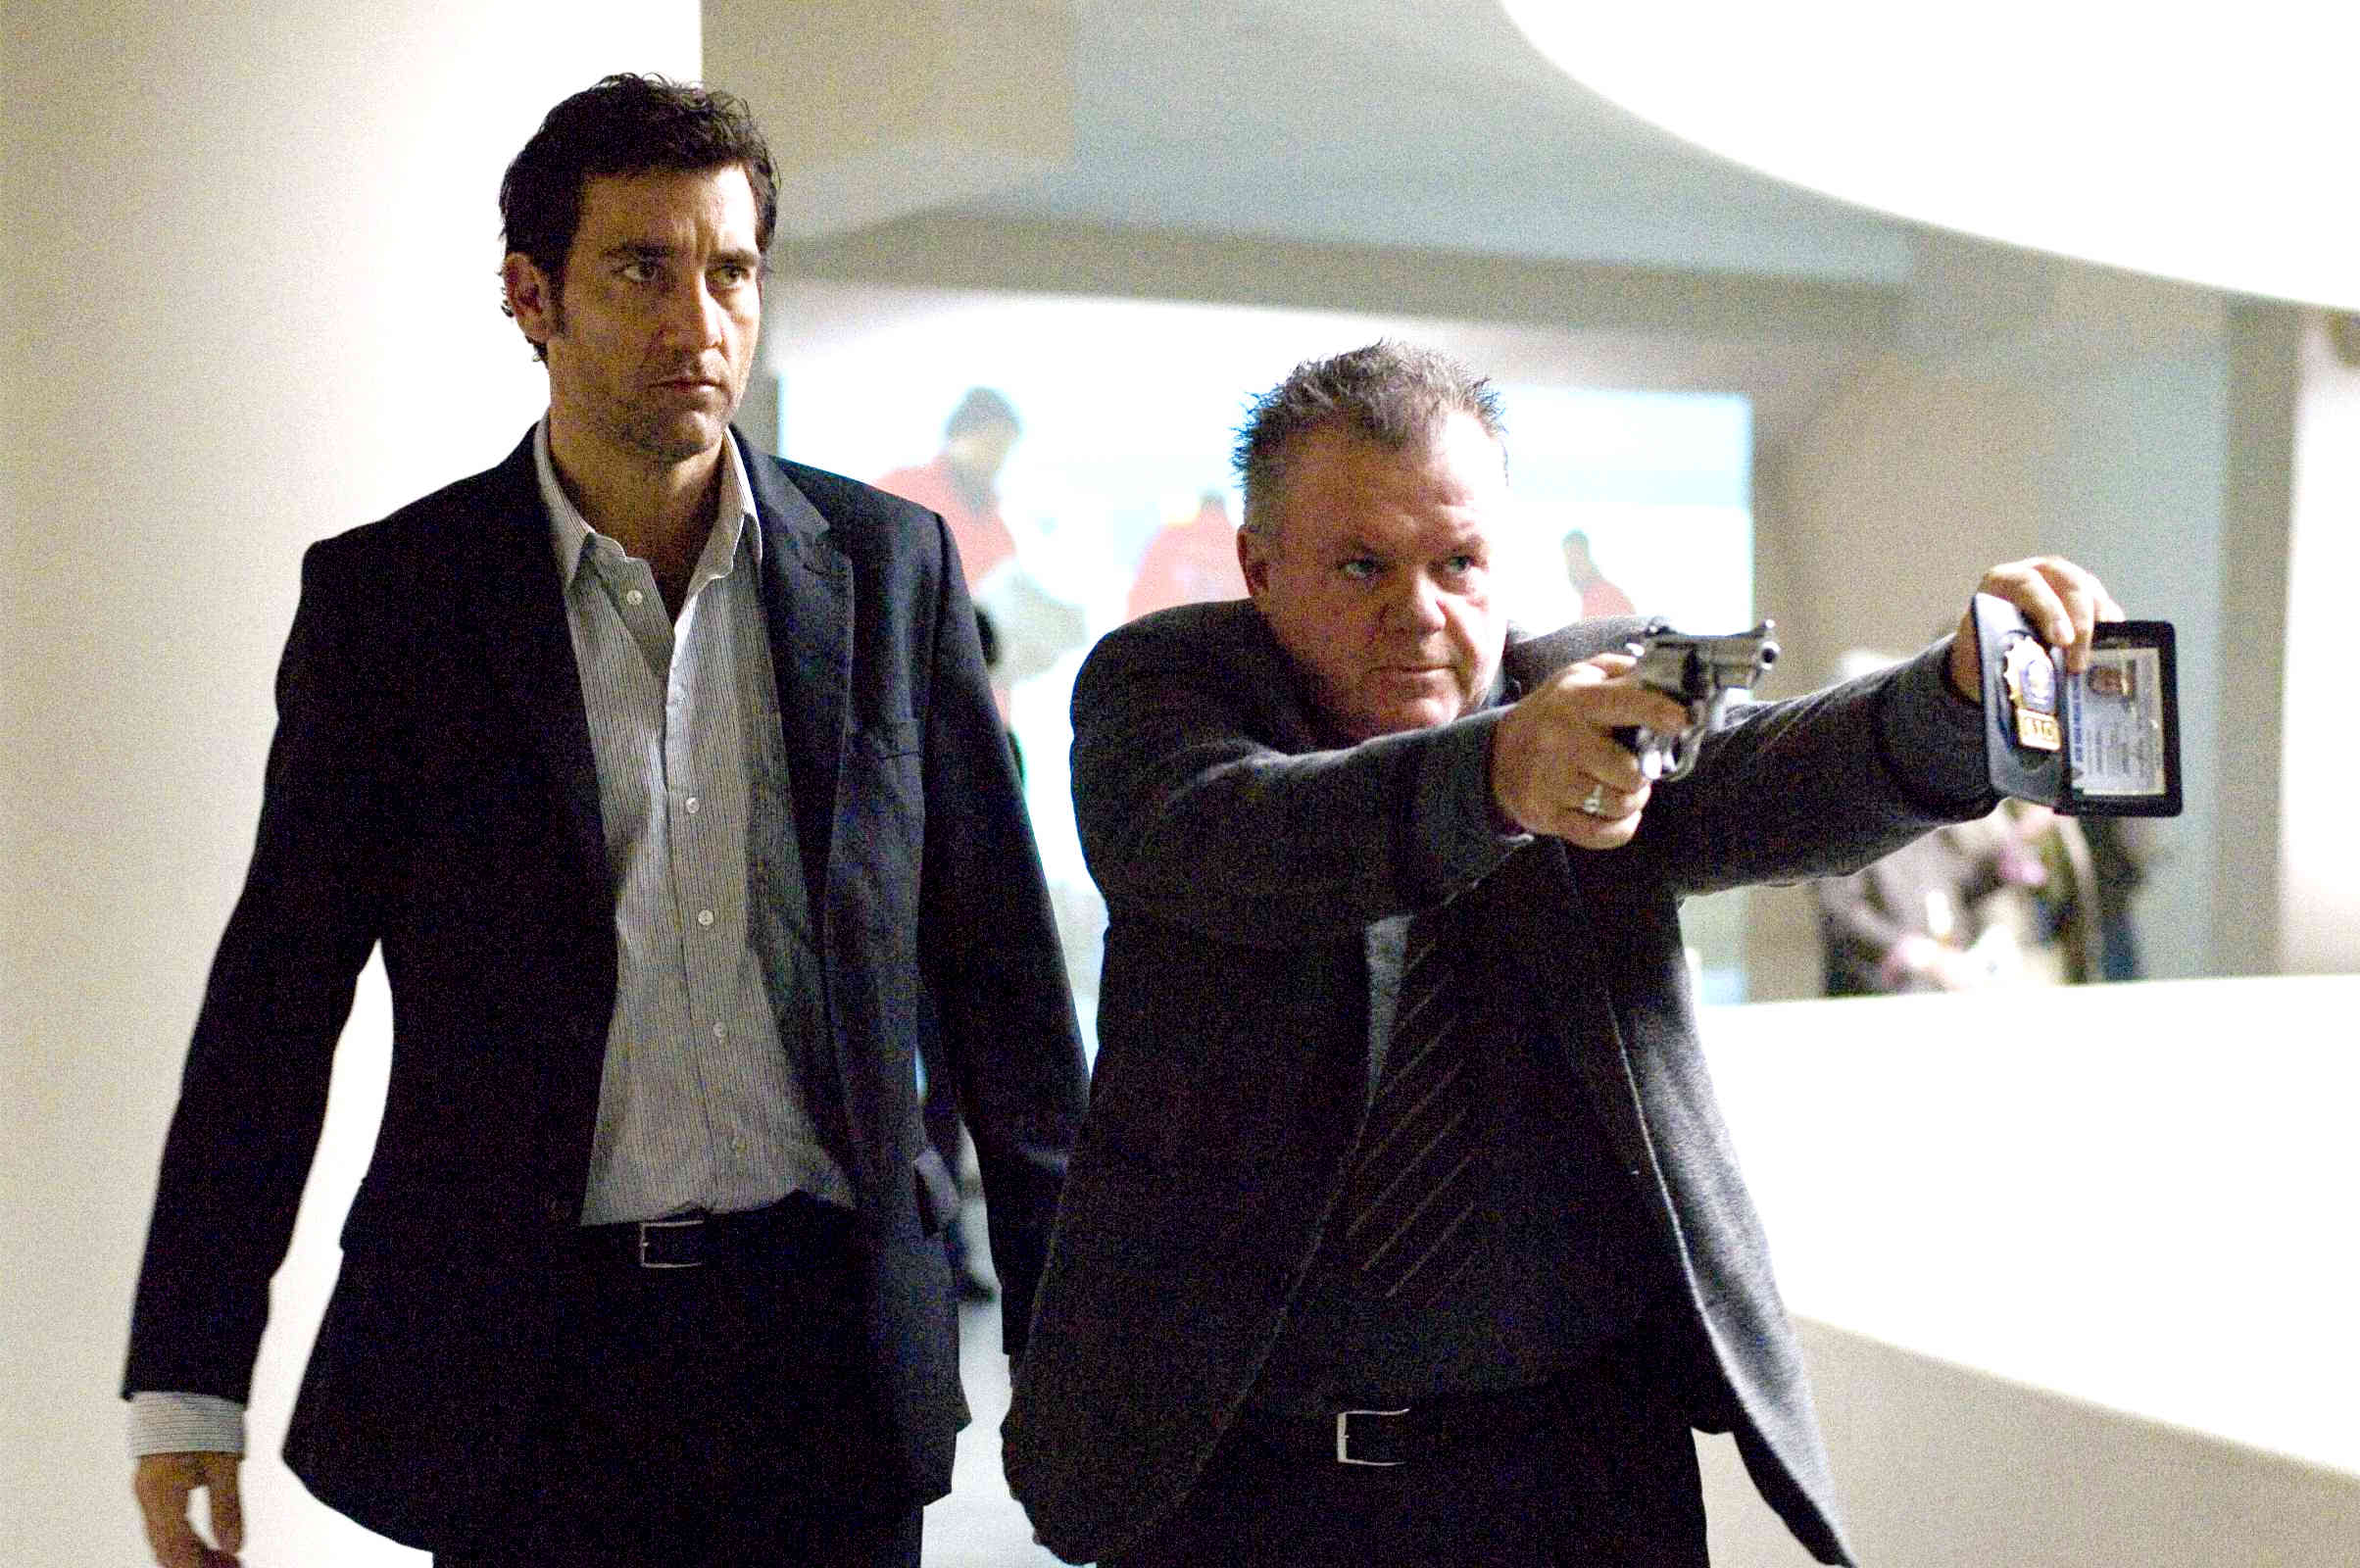 Clive Owen stars as Louis Salinger and Jack McGee stars as Detective Bernie Ward in Columbia Pictures' The International (2009). Photo credit by Jay Maidment.